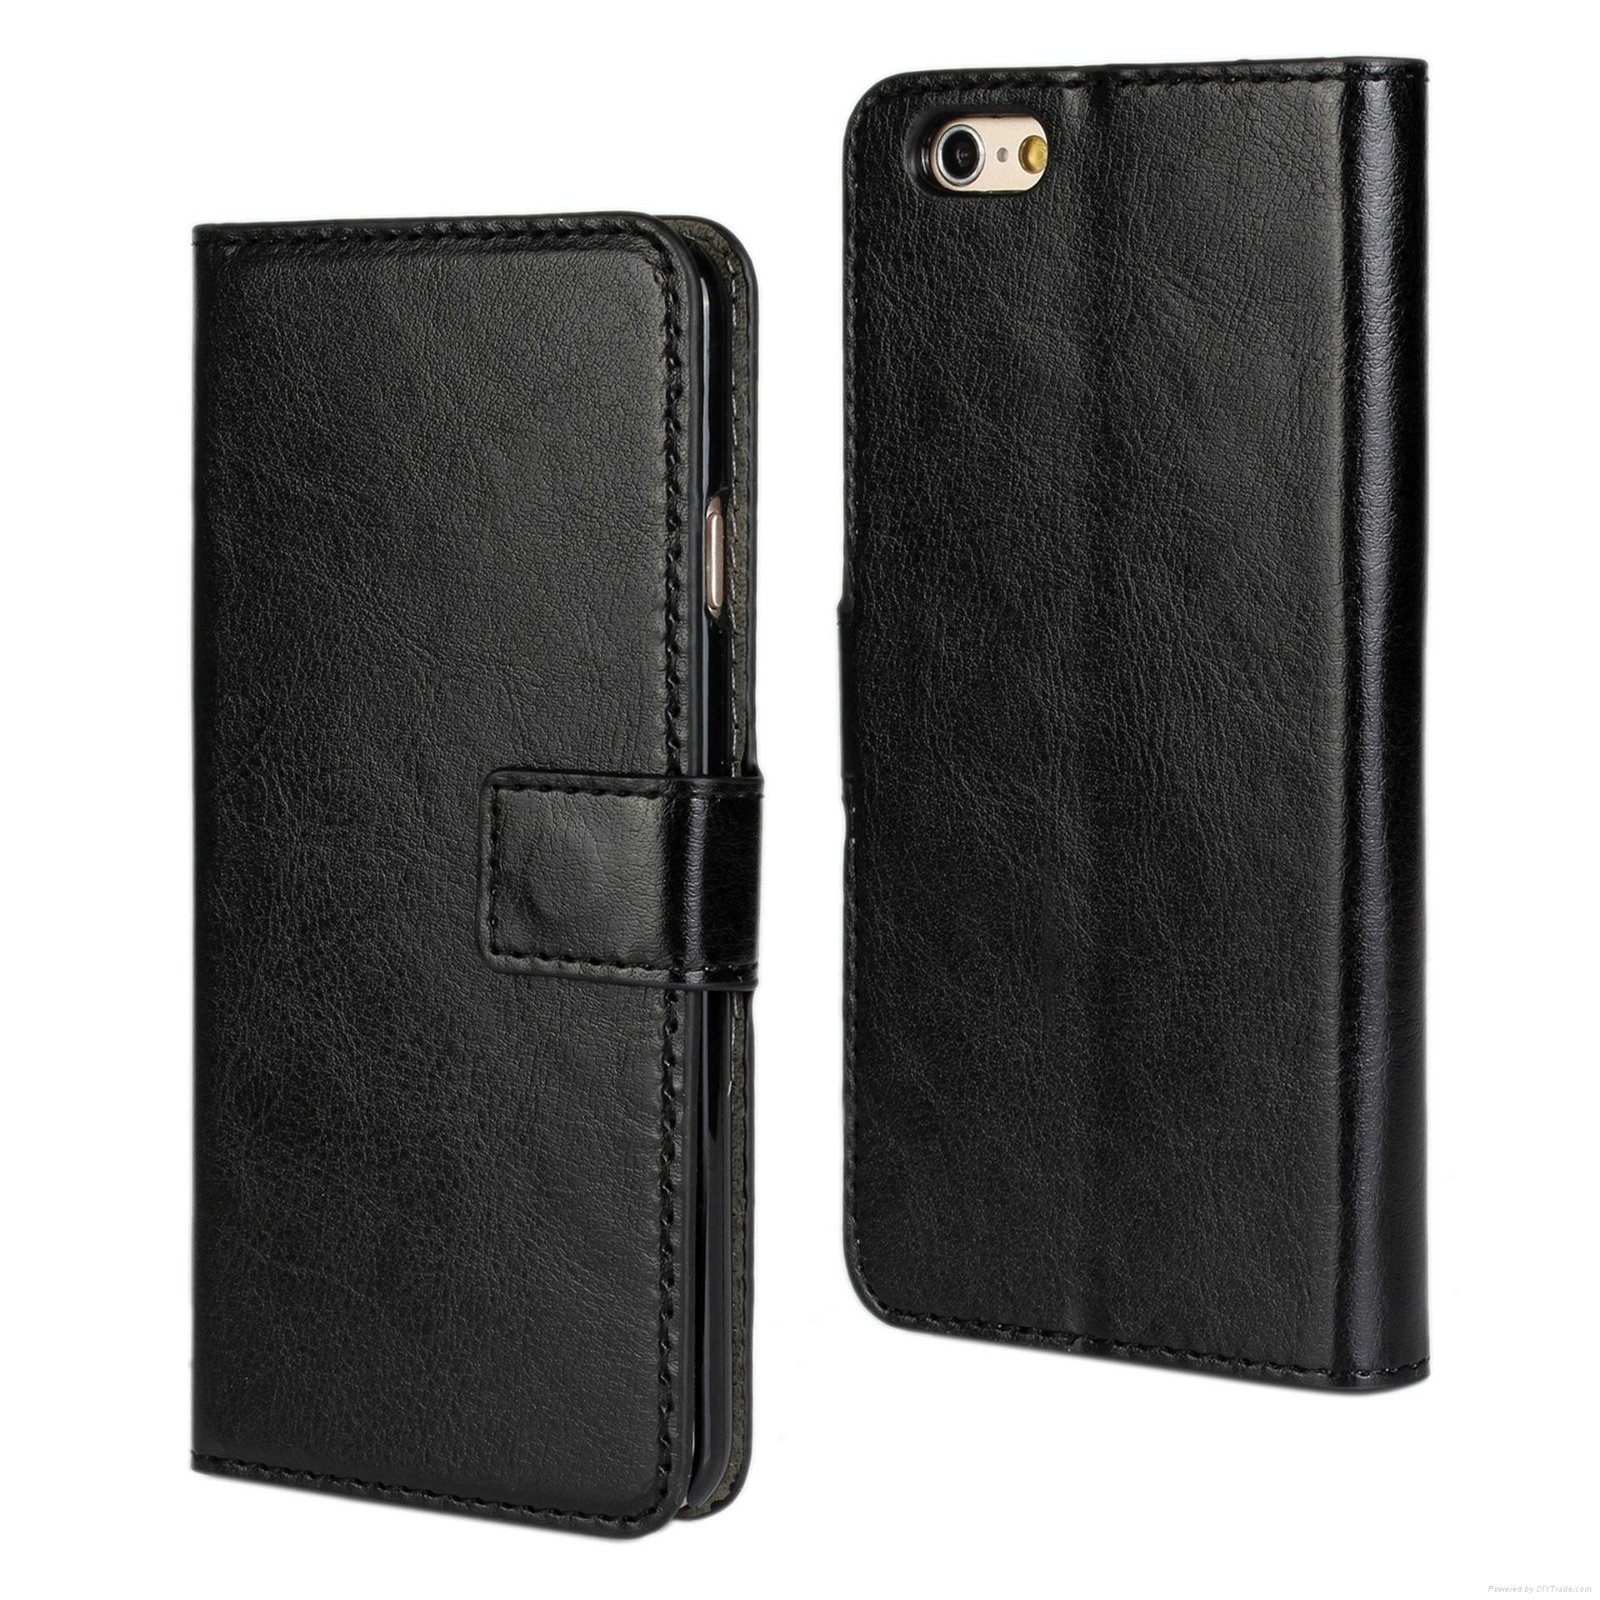 Crazy horse Leather Protector Wallet Case For iPhone for samsung 2